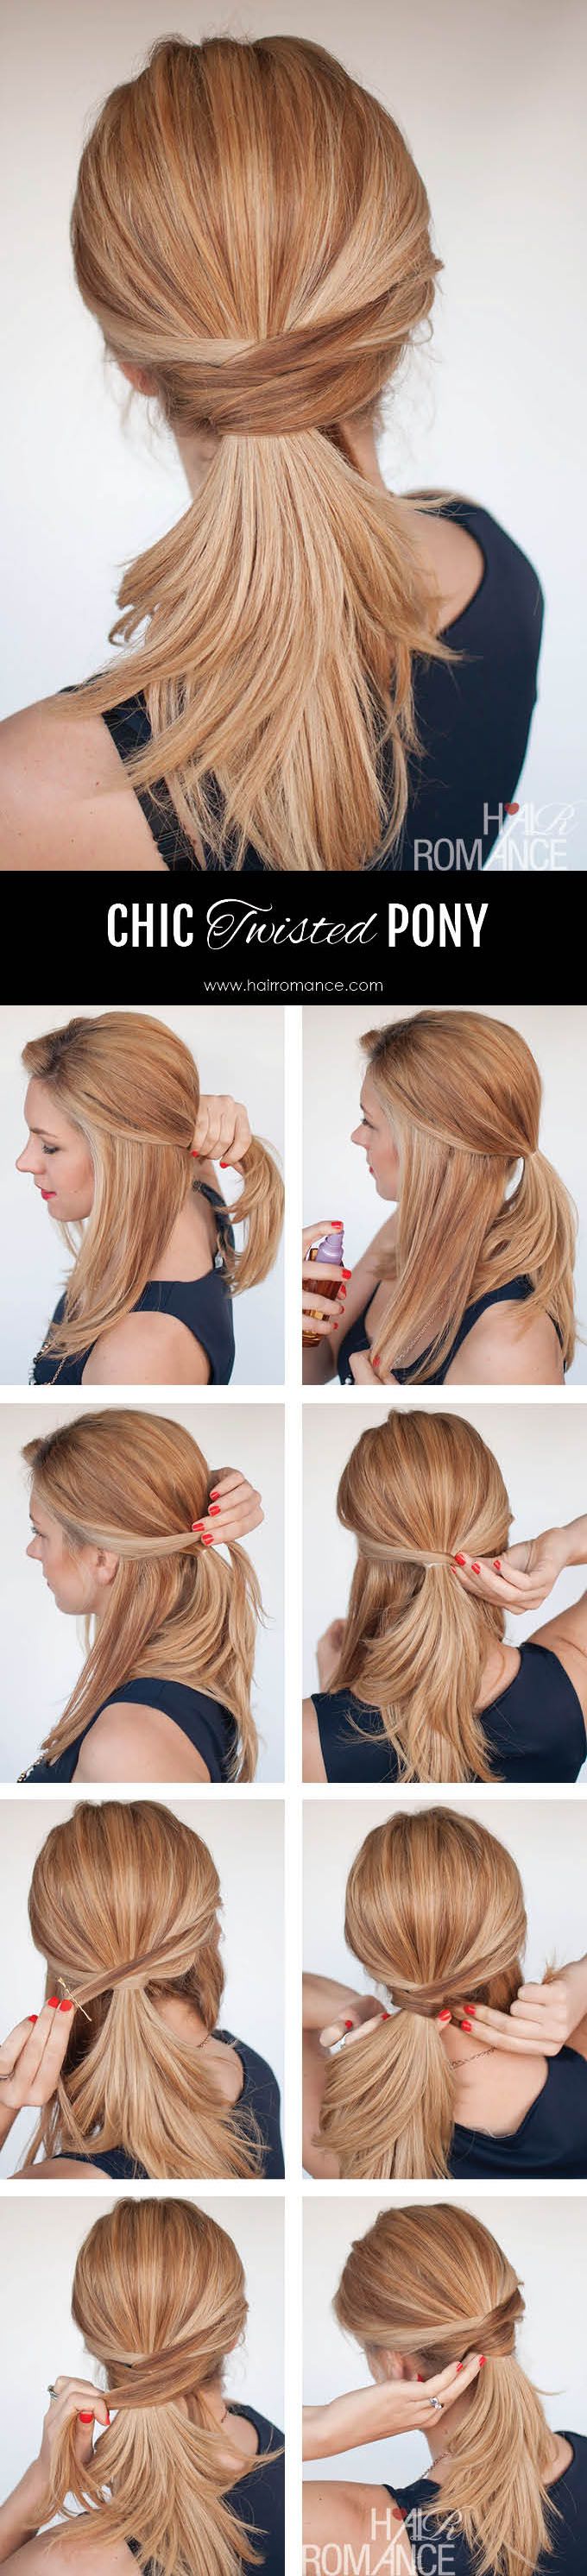 Chic Twisted Ponytail